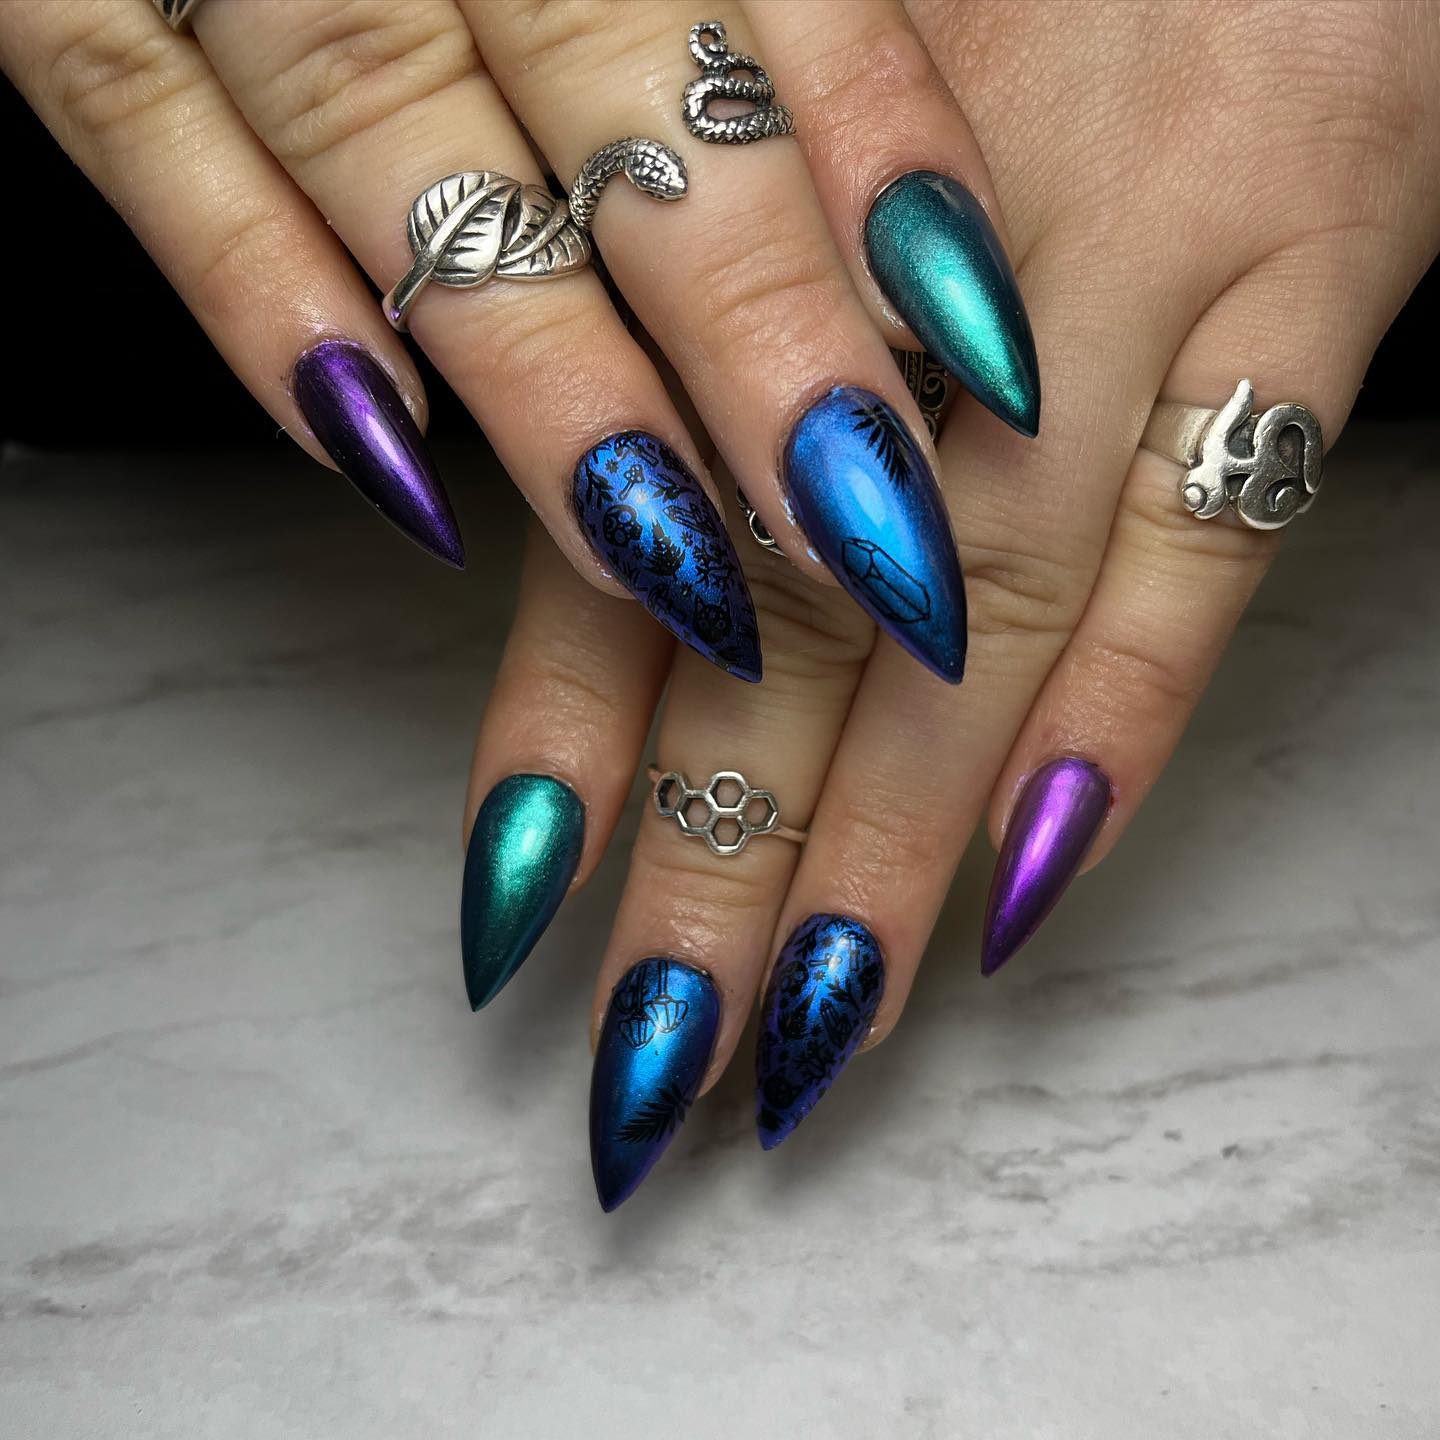 The combination of dark blue, green and purple is so electric. This sharp and bold stiletto mani is quite matching with these colors.